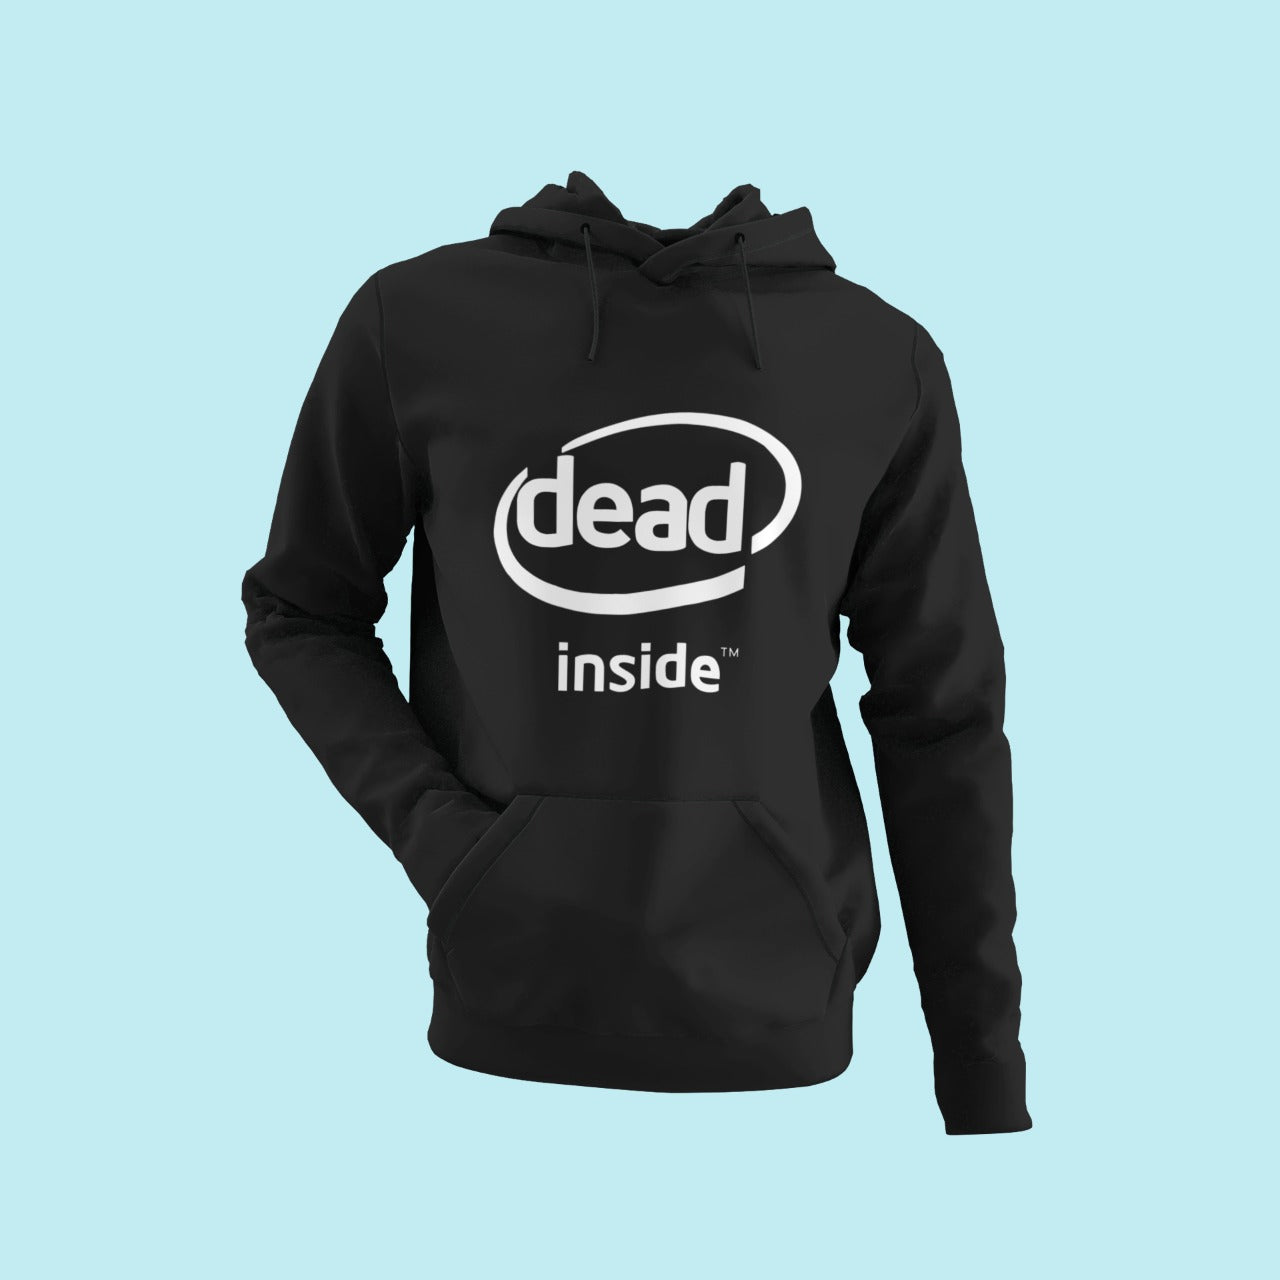 Level up your gaming wardrobe with our black "Dead Inside" hoodie, featuring a graphic design inspired by the popular meme and Intel Inside logo. Made with high-quality materials, this cozy hoodie is perfect for showing off your love for internet culture and gaming. Order now and join the trendsetting meme enthusiasts and gamers with this unique and stylish design.